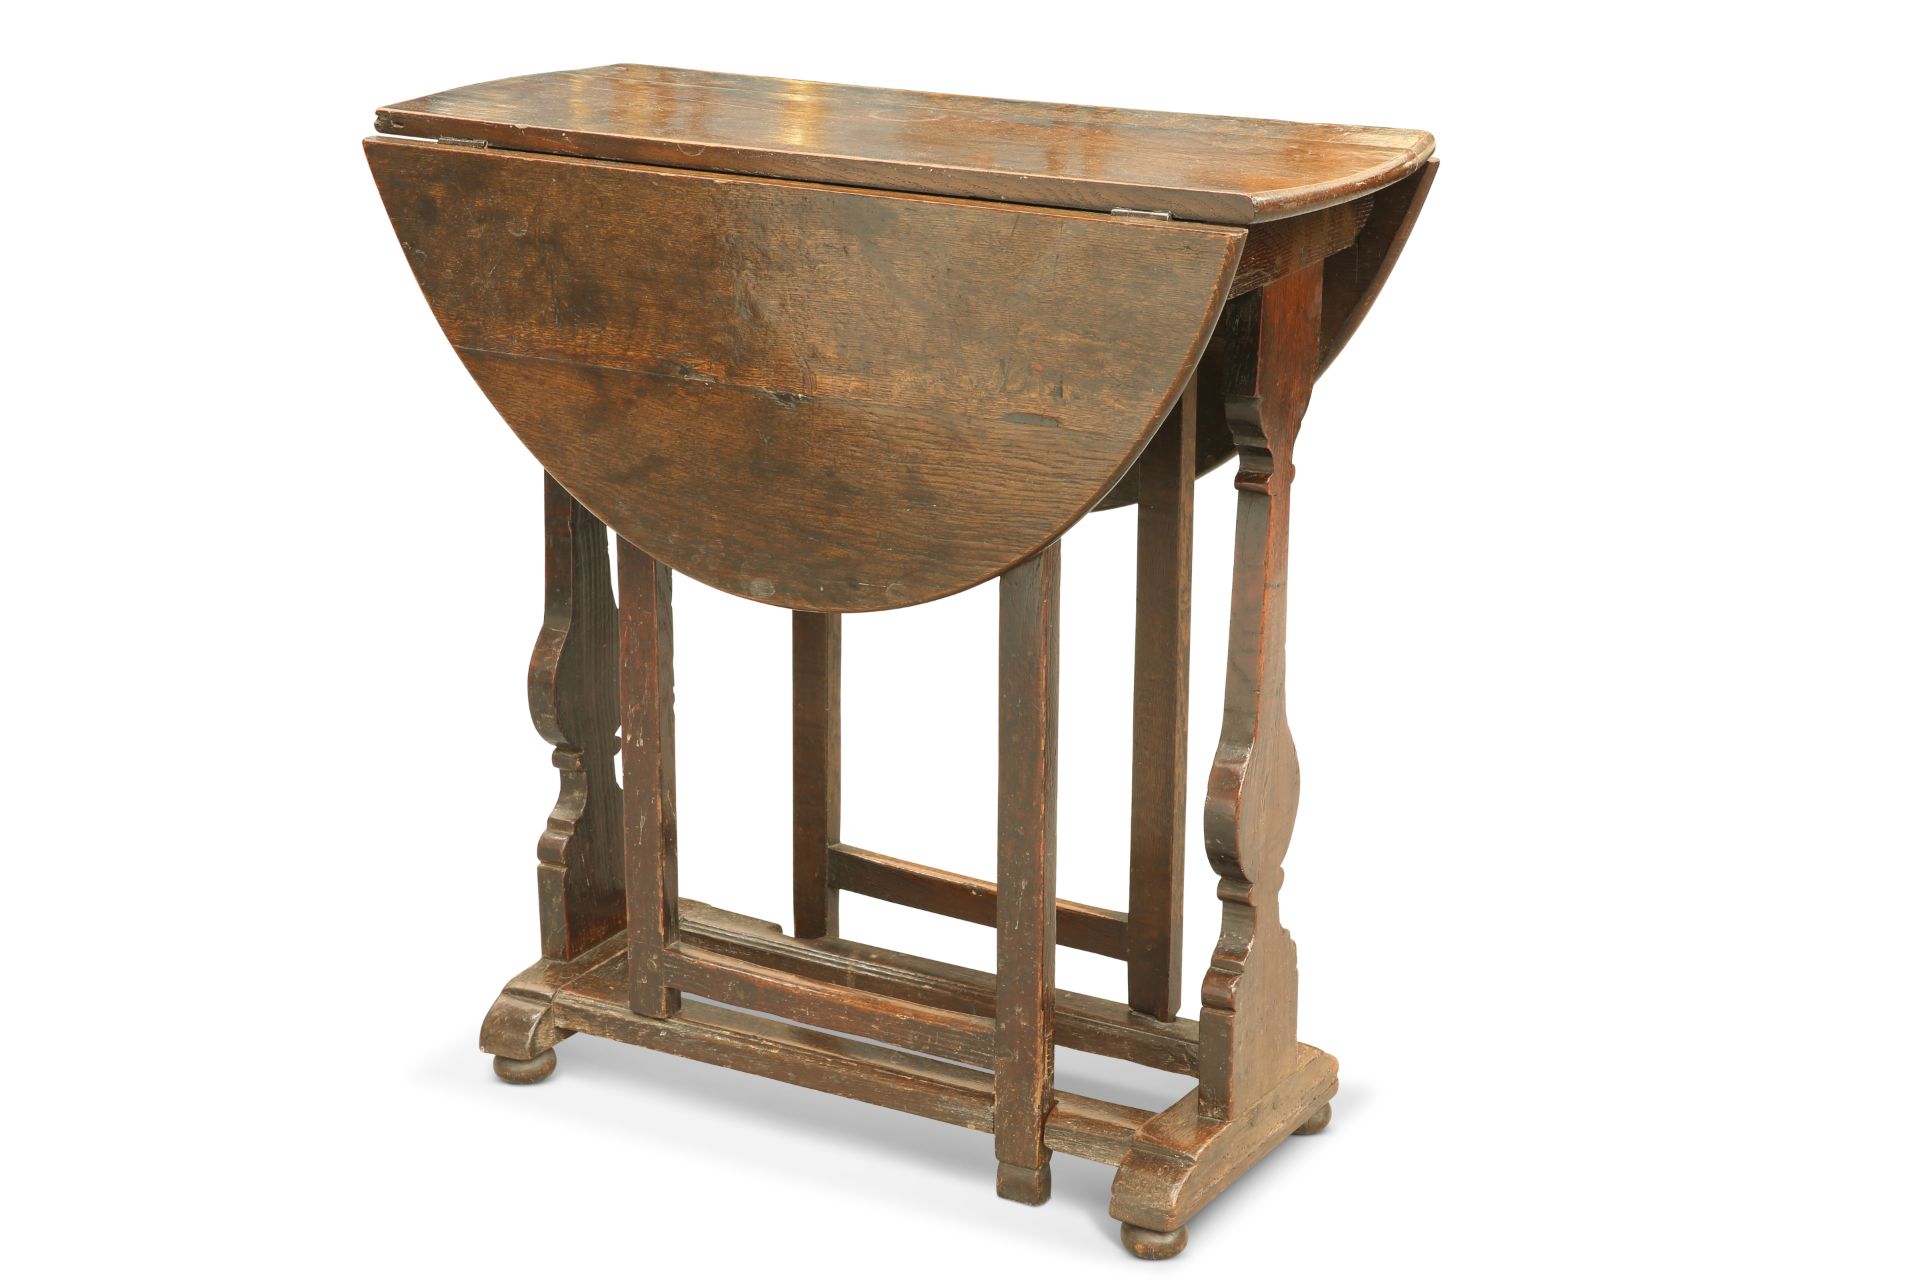 A LATE 17TH CENTURY OAK GATELEG TABLE, OF SMALL PROPORTIONS